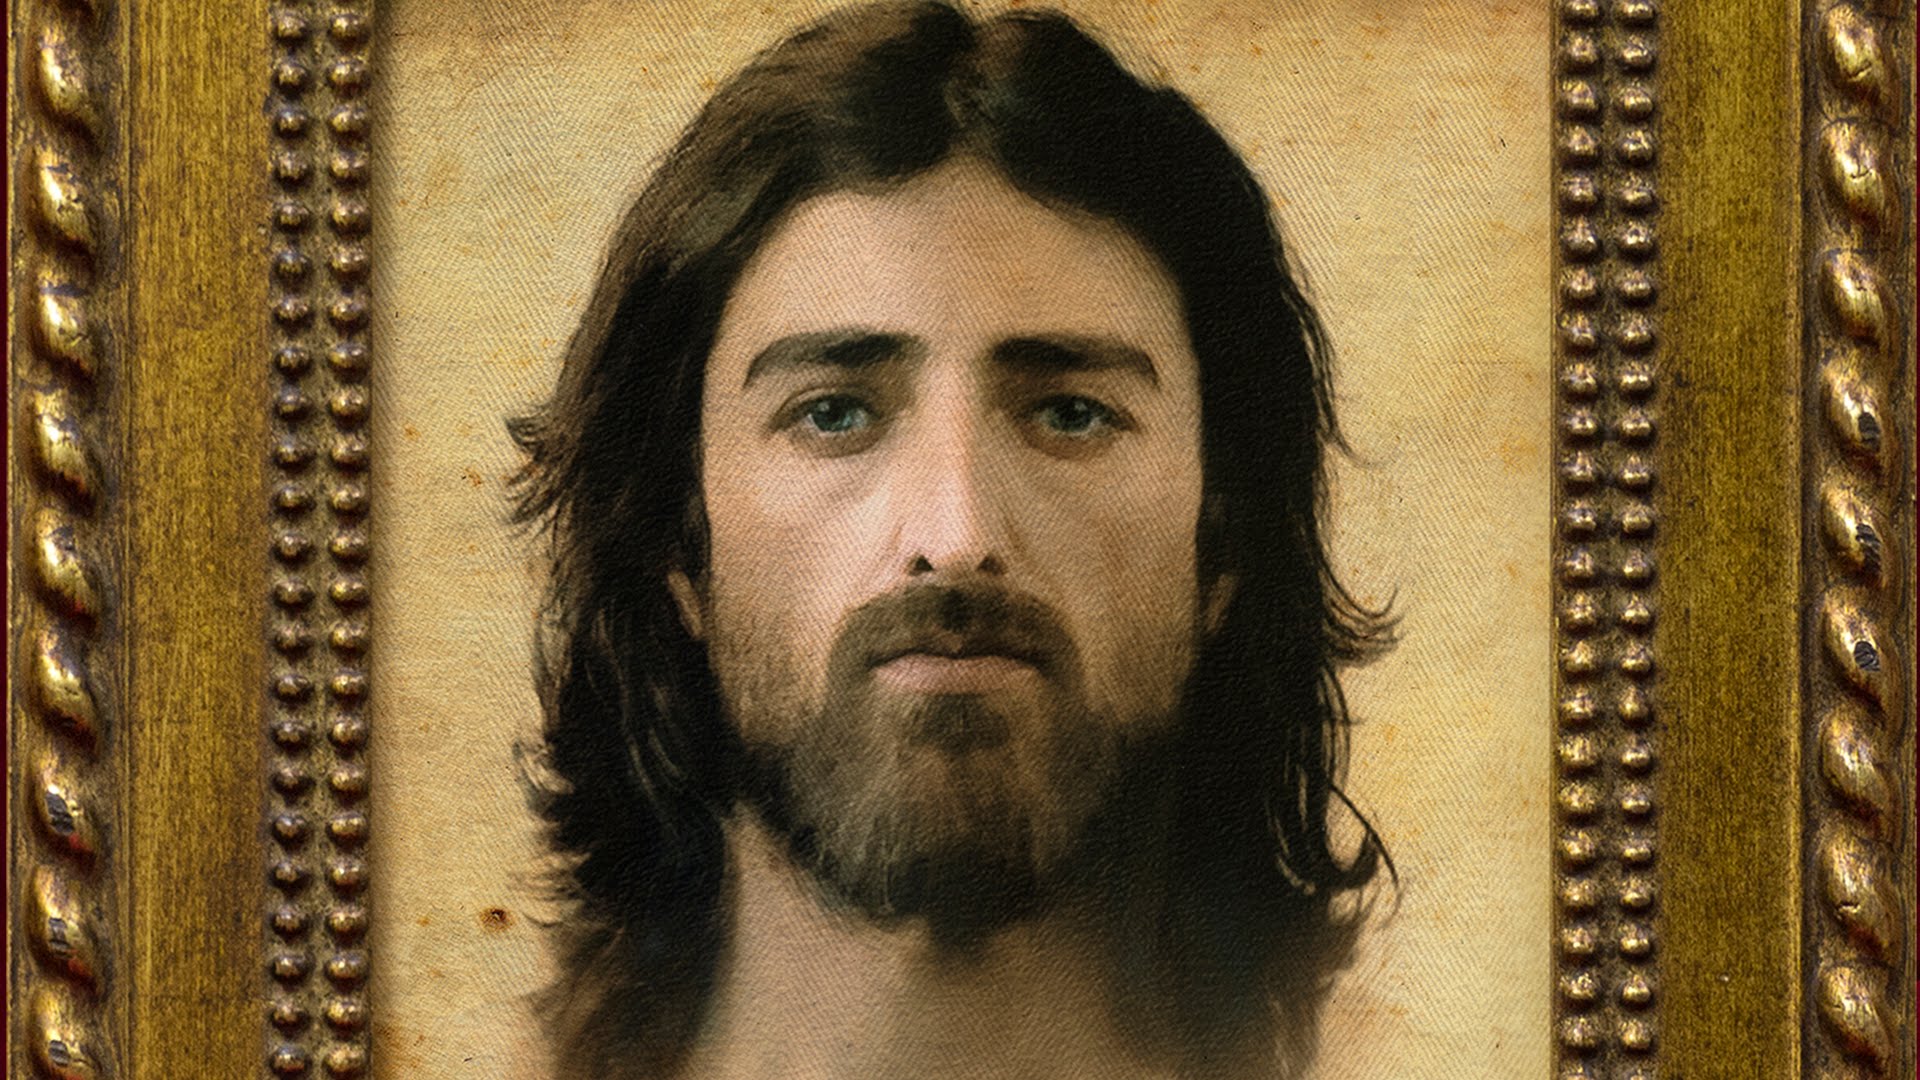 Real Face Of Jesus Christ From The Shroud Of Turin - Jesus Christ Real ...